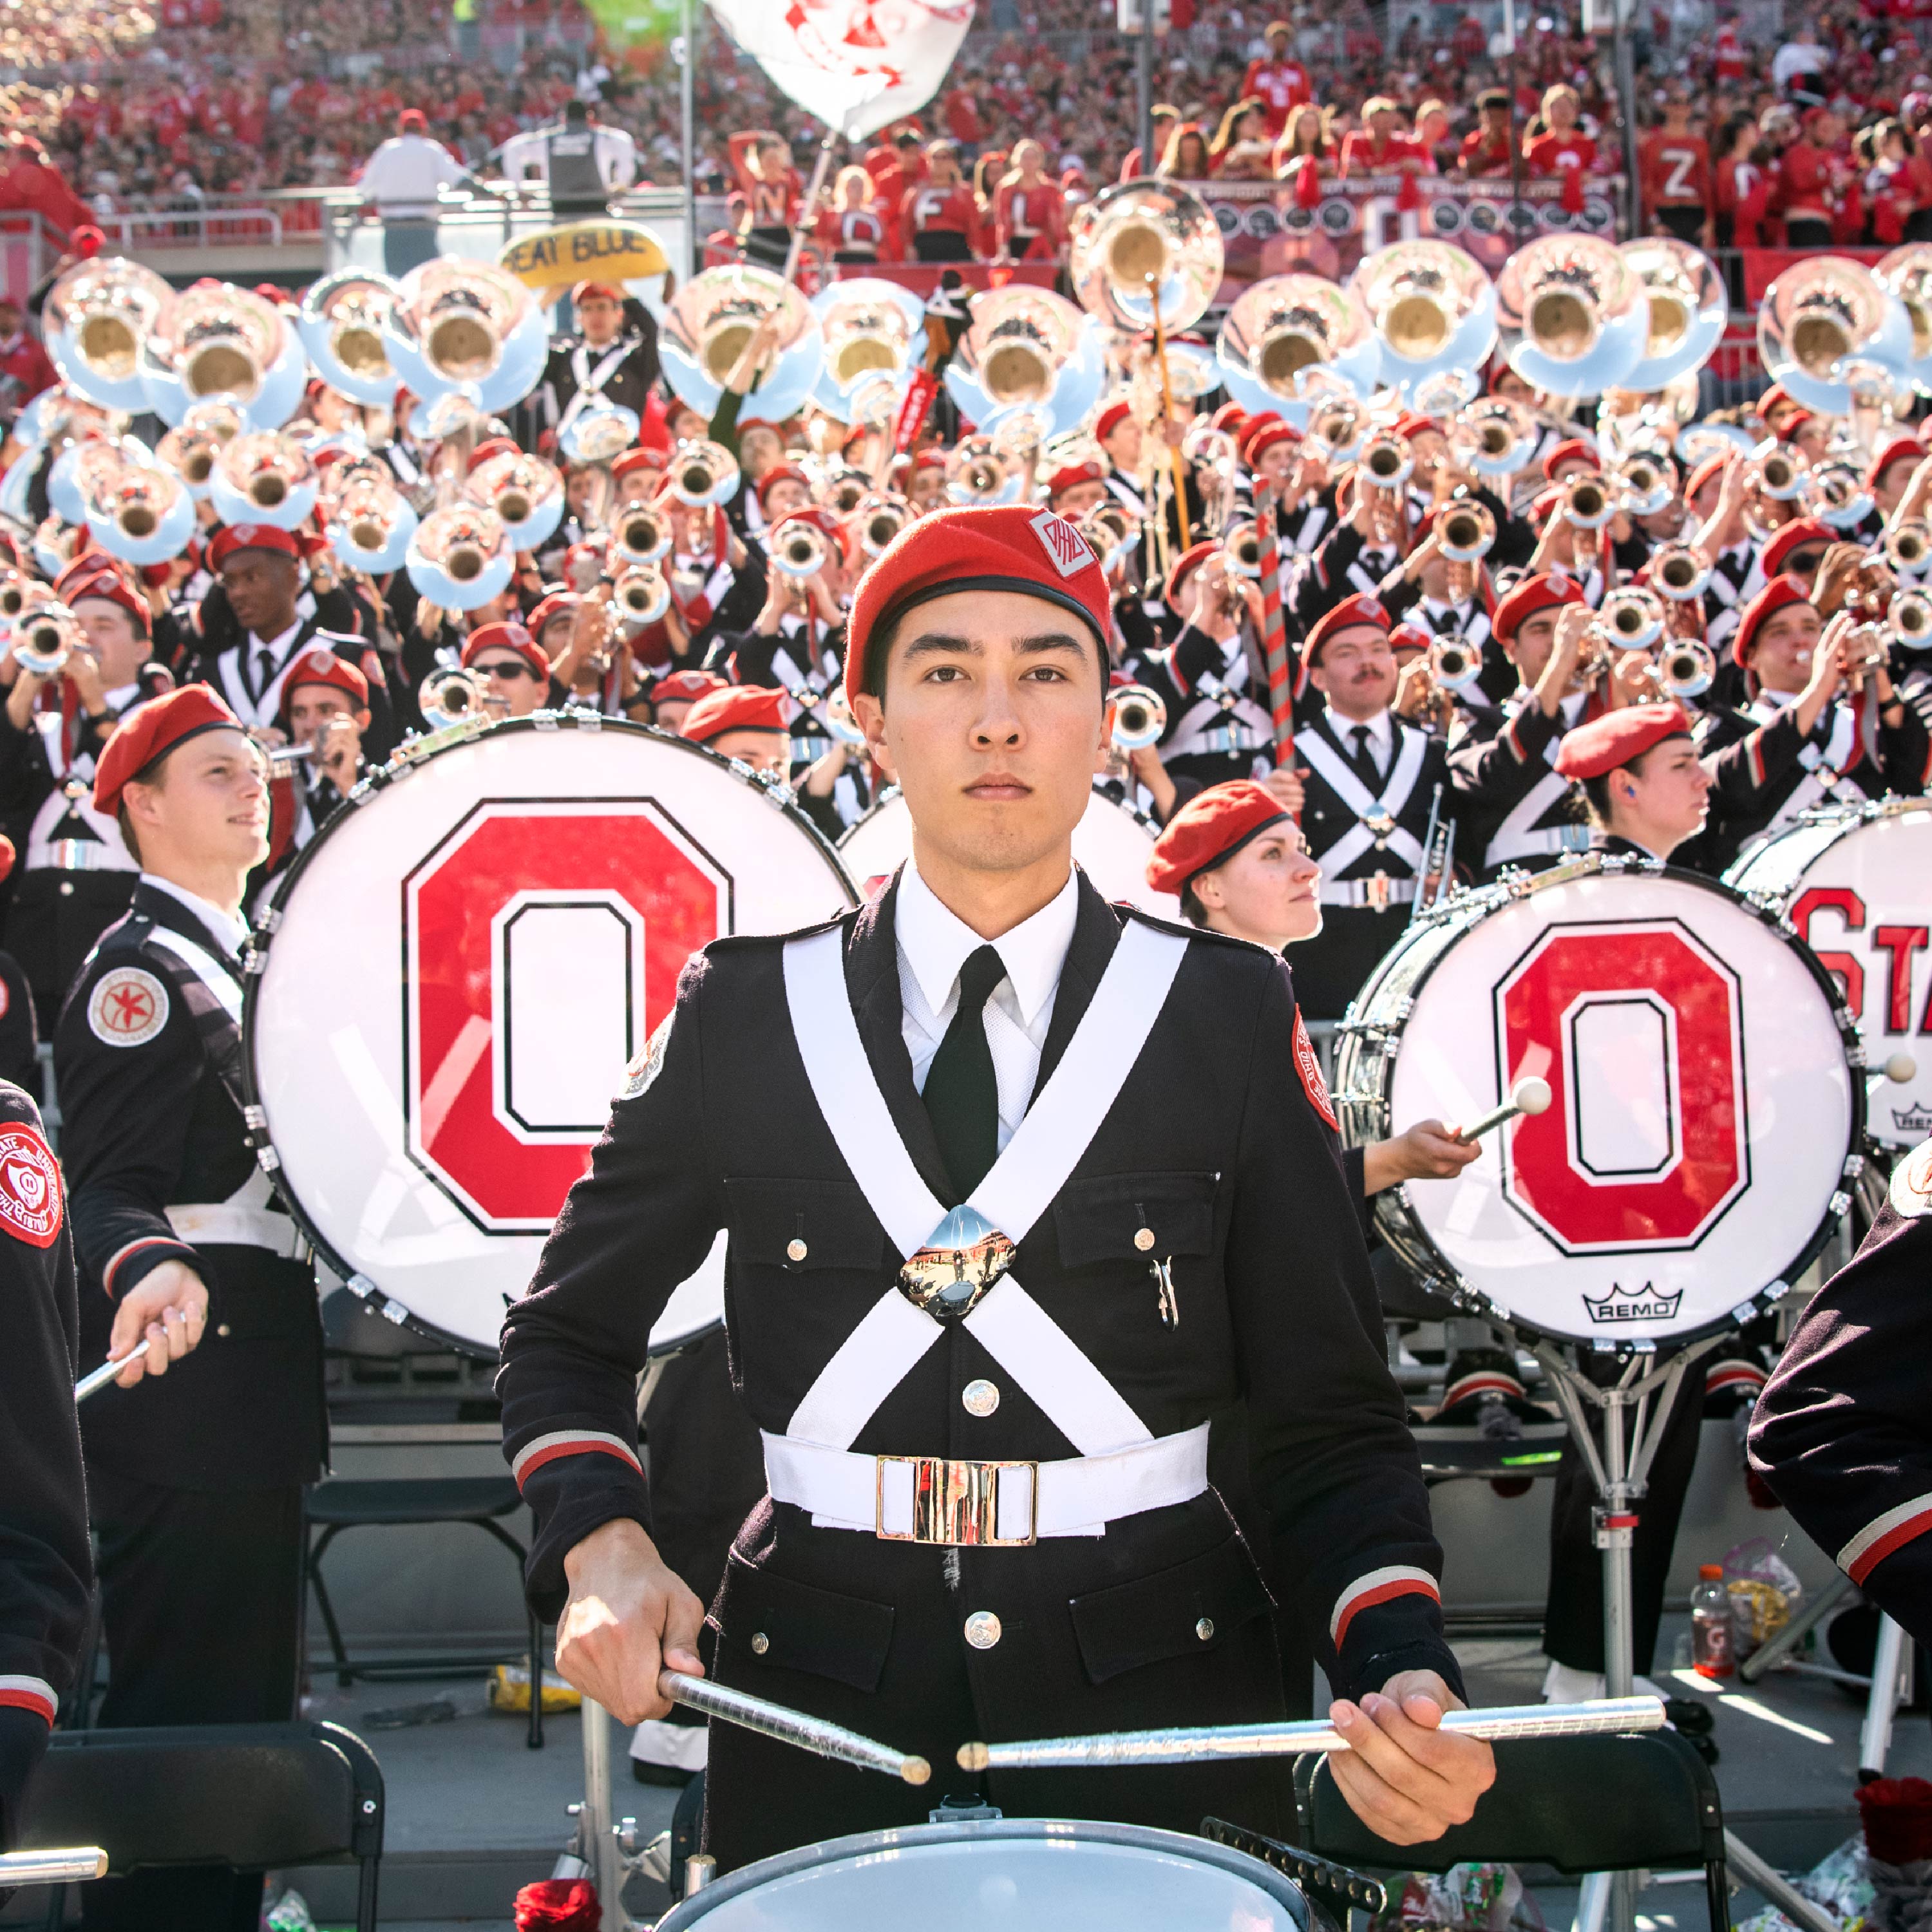 A drummer in the Ohio State Marching Band holds his beat and is flanked by two bass drummers with sousaphone players in the background